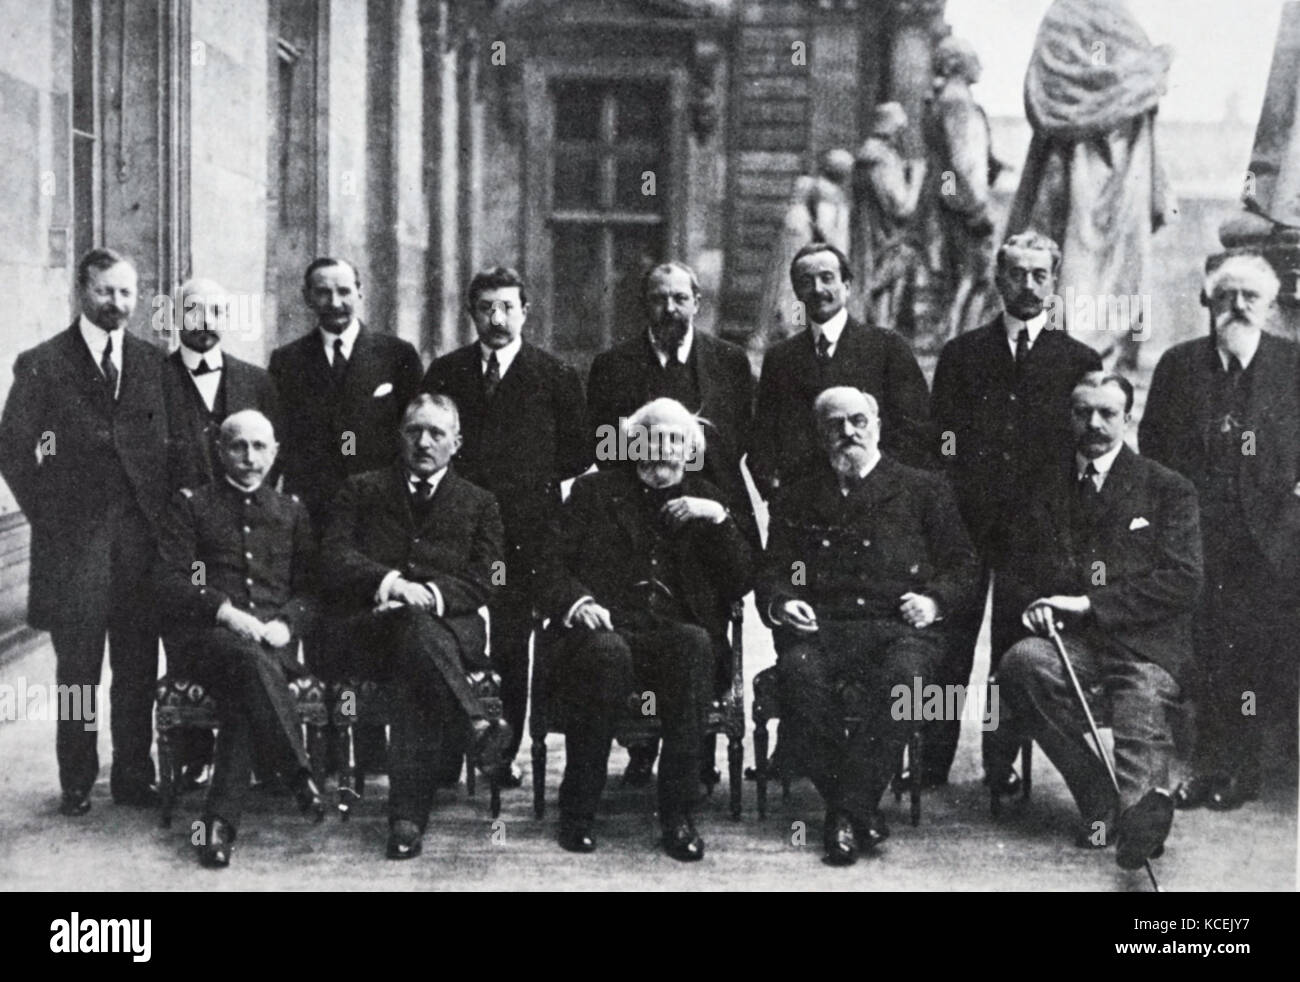 Photograph of the New French Ministry of 1915. Pictured is Marie-Jean-Lucien Lacaze (1860-1955) Minister of the Navy, René Viviani (1863-1925) Alexandre Ribot (1842-1923) President of the Council and Minister of Foreign Affairs, Léon Bourgeois (1851-1925) Minister of Labour and Social Security Provisions, and André Maginot (1877-1932) Minister of Overseas France. Dated 20th Century Stock Photo